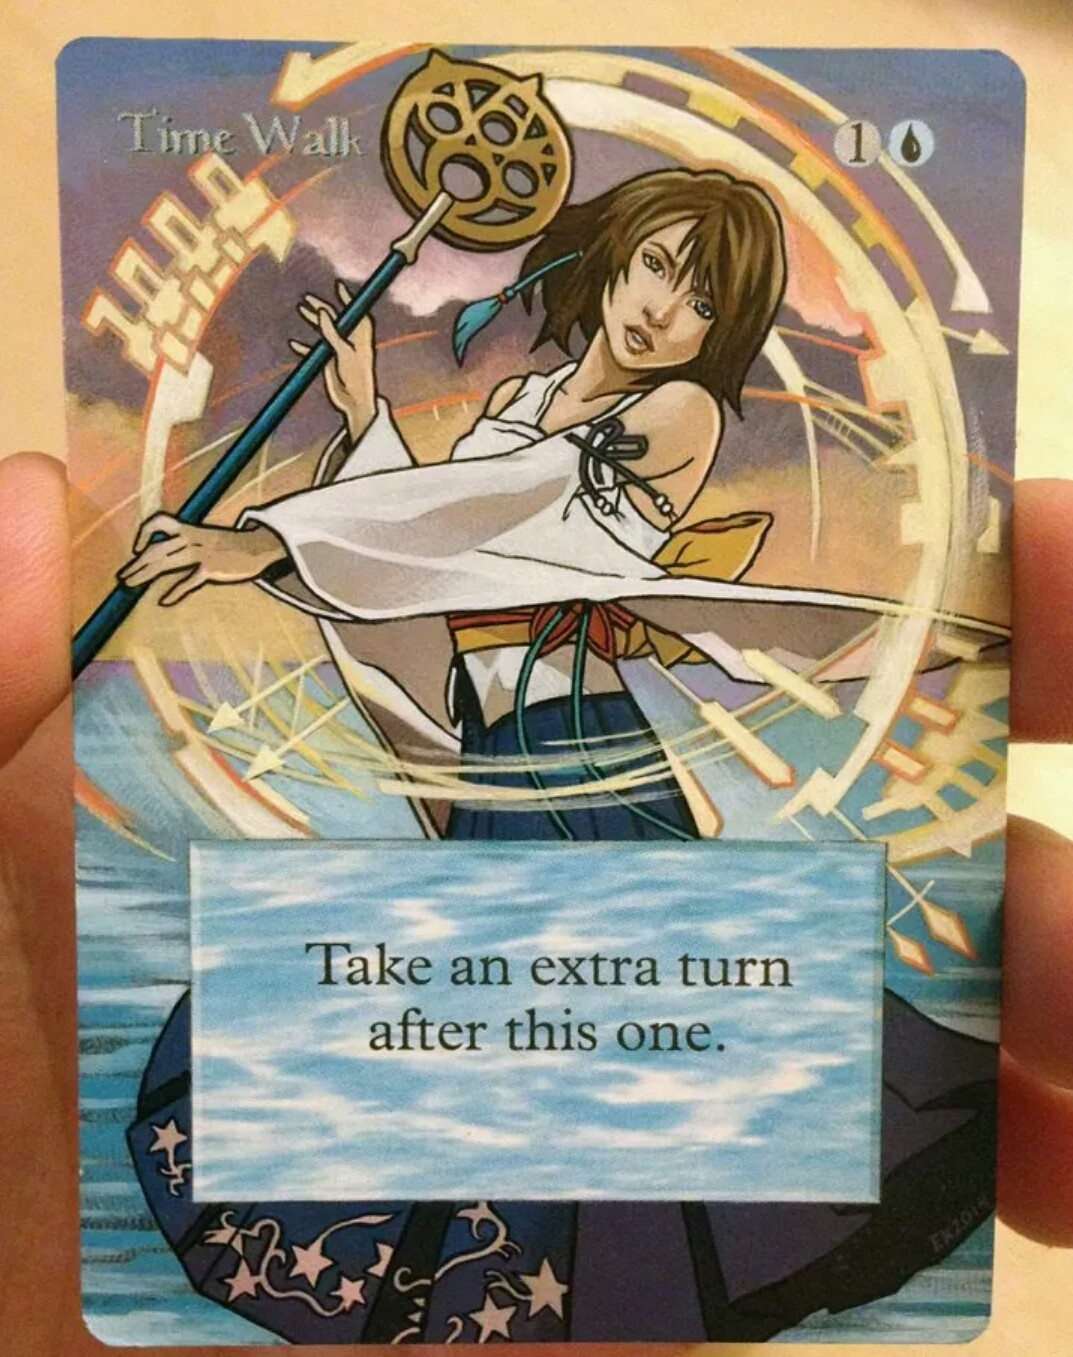 This is an Awesome Alter